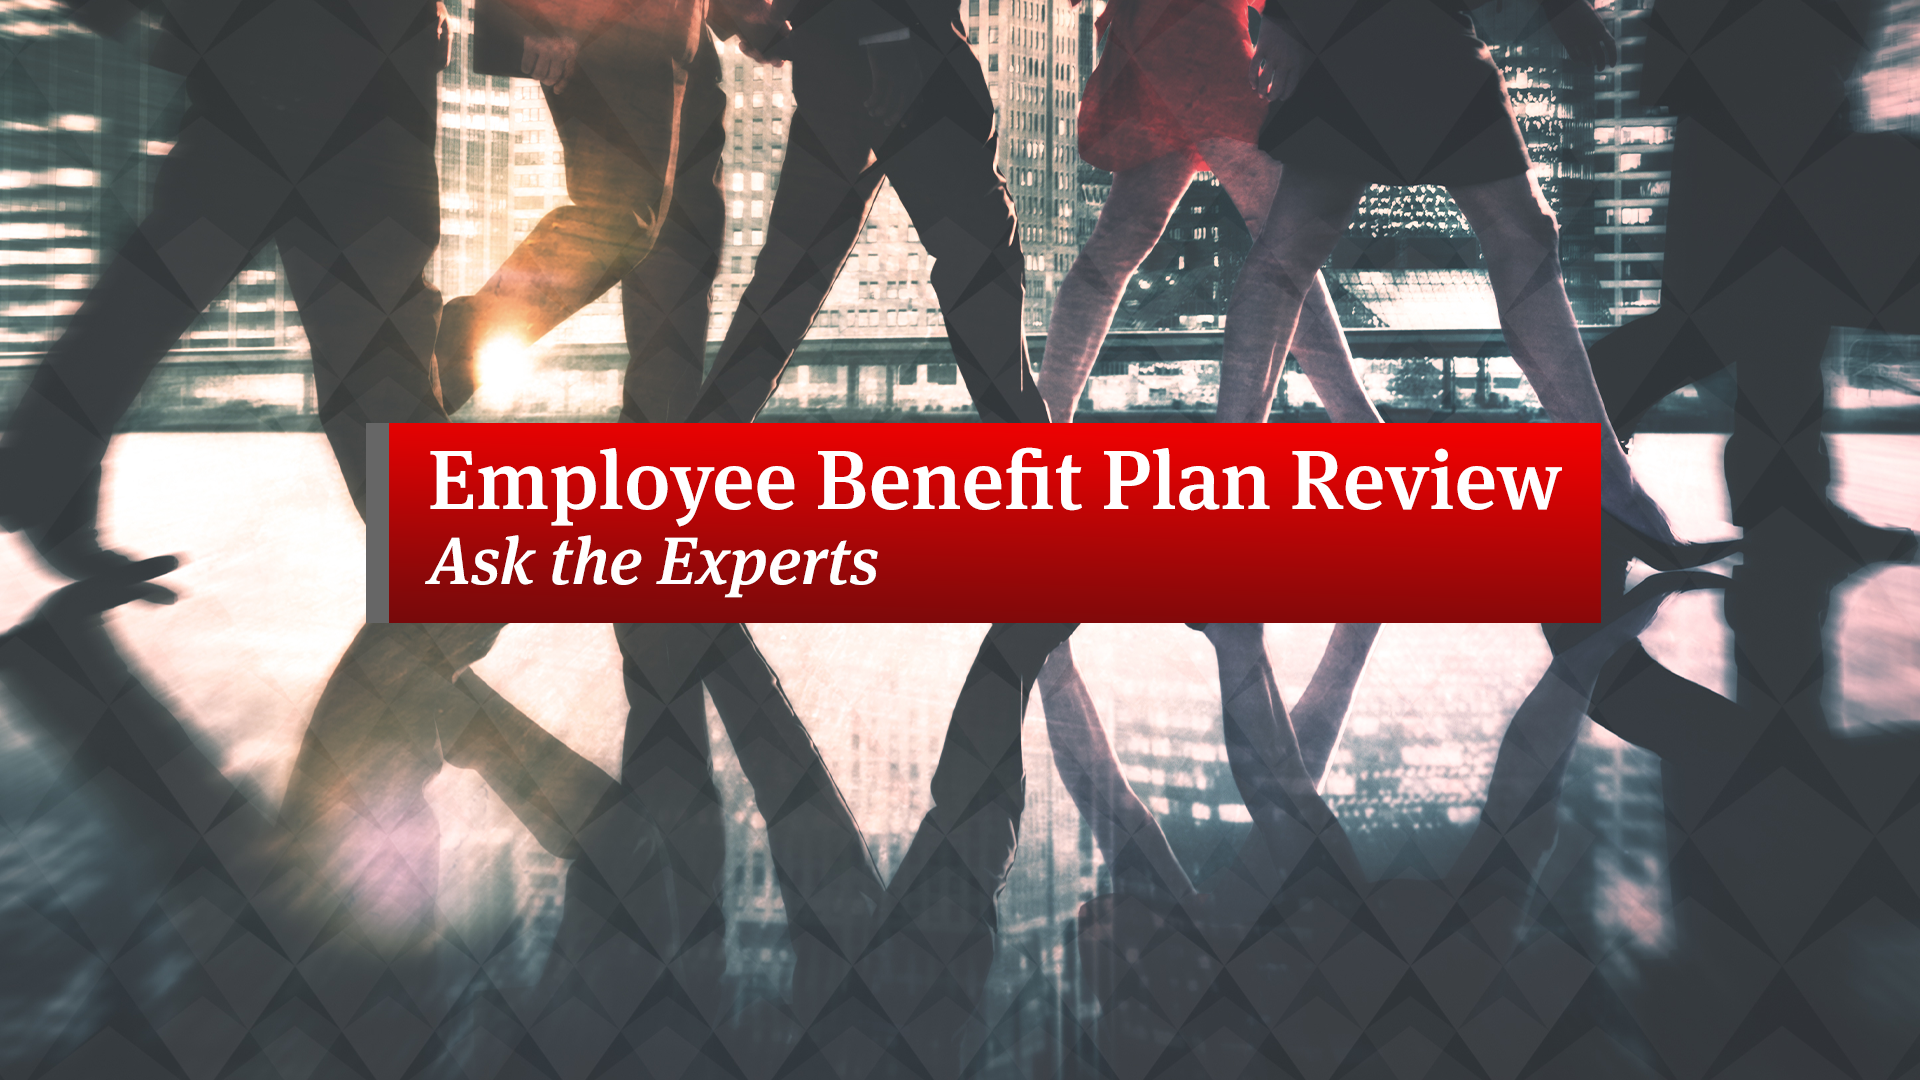 Employee Benefit Plan Review: Ask the Experts